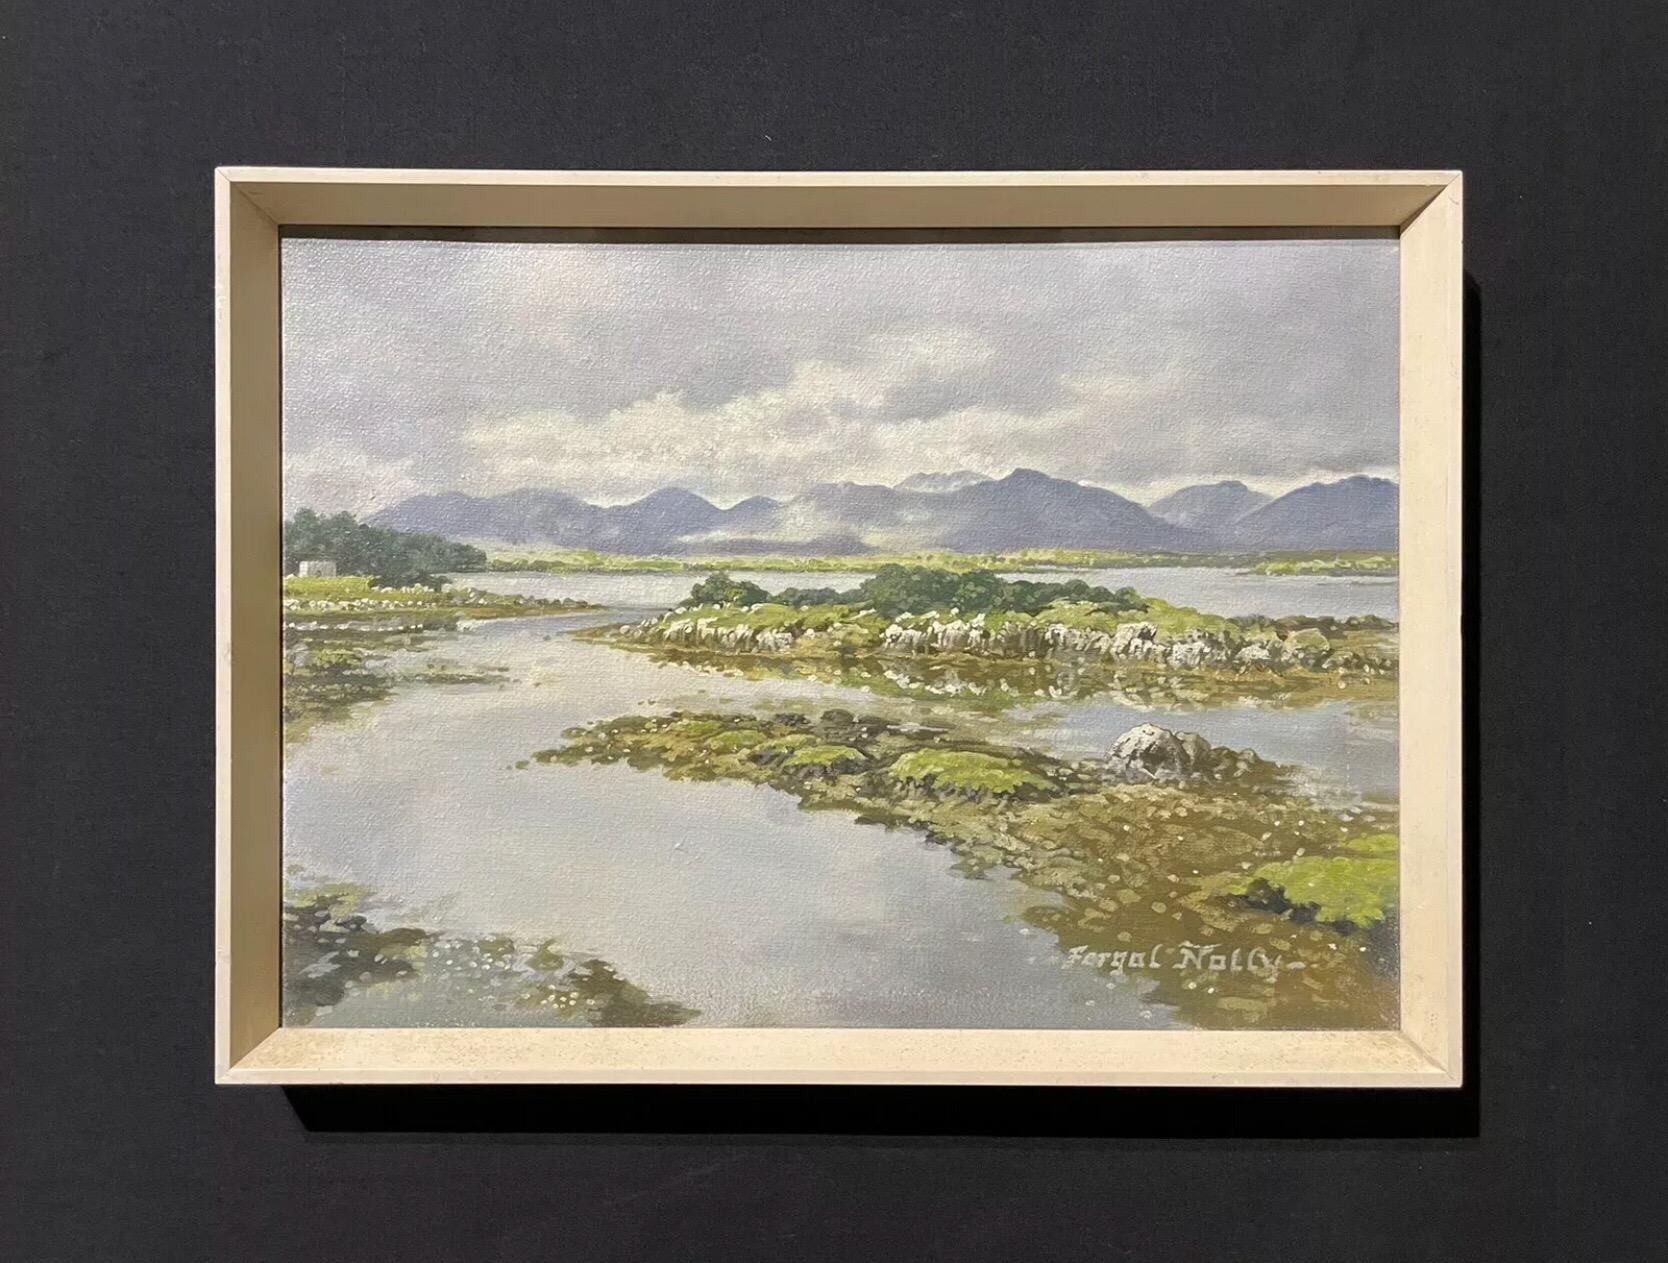 Signed Irish Oil Painting - Boggy Irish Lough Landscape Distant Mountain Range - Gray Landscape Painting by Unknown